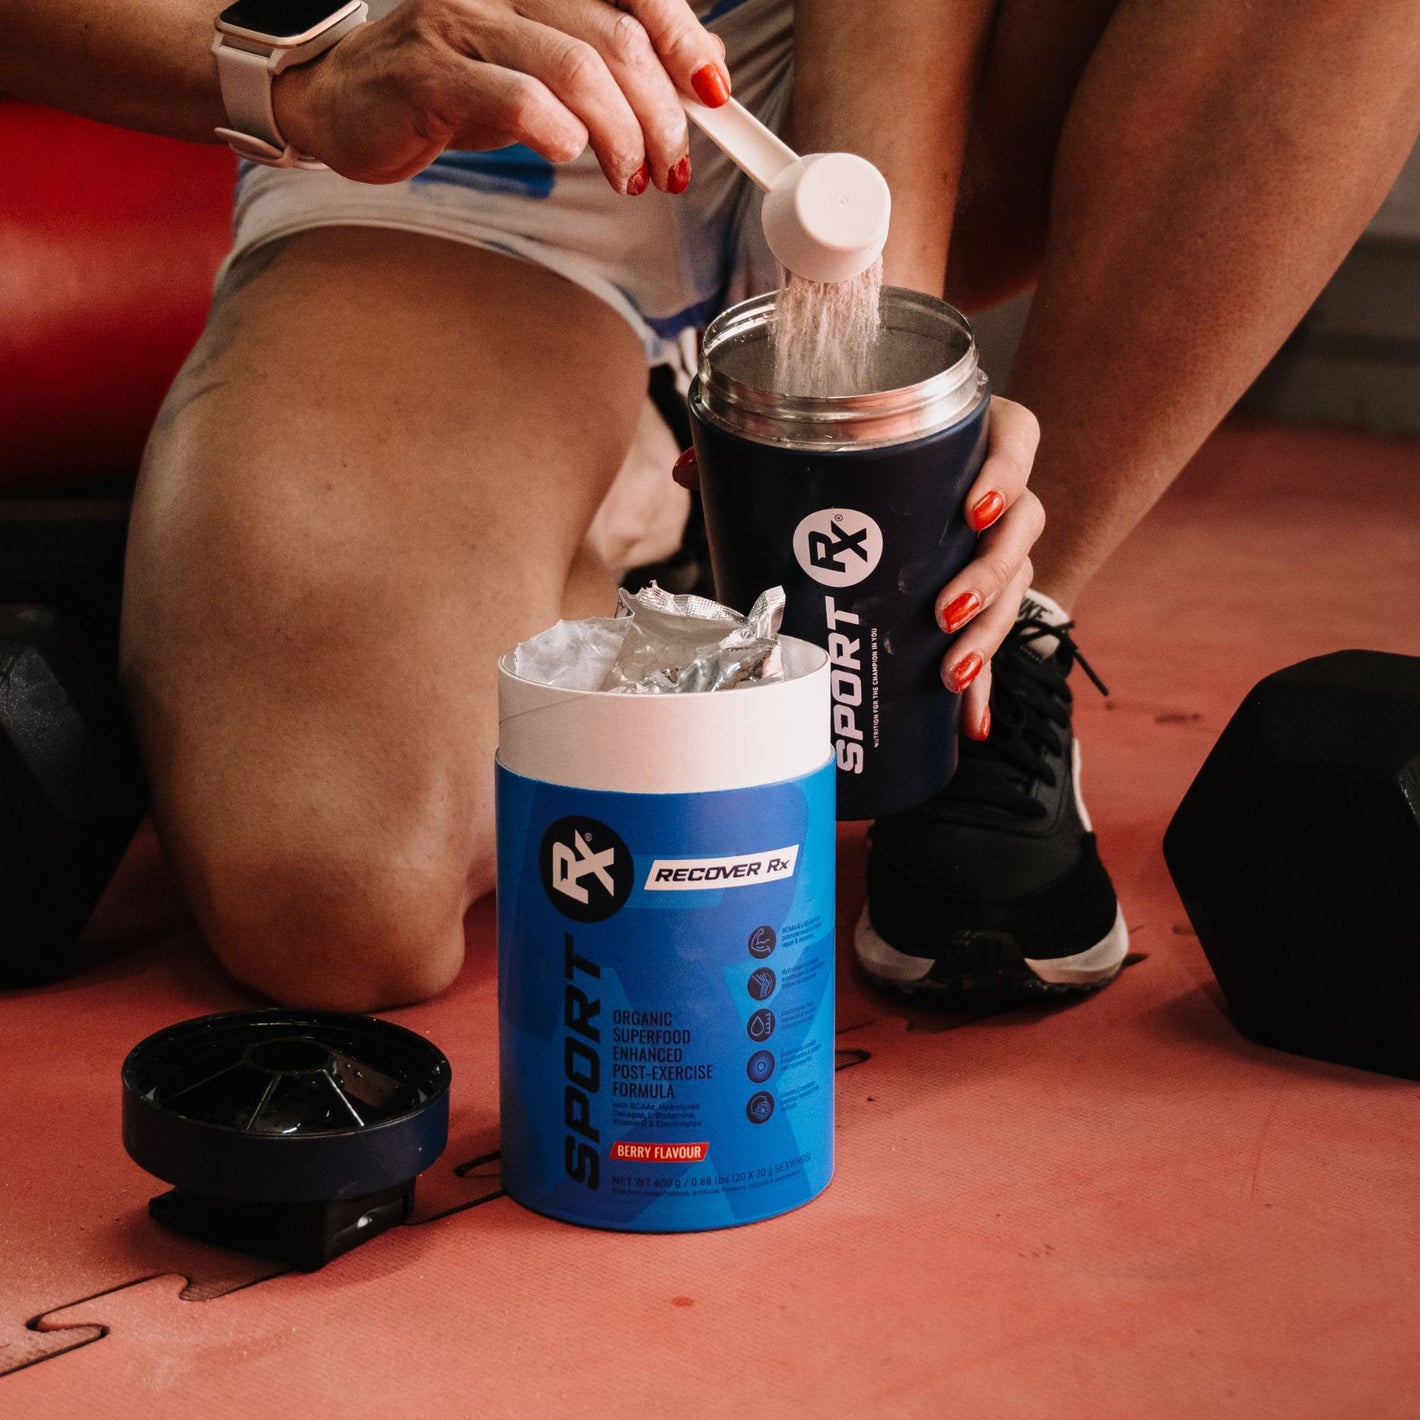 SPORT_Rx_Athlete_Scooping_RECOVERY_Rx_Product_Into_A_SPORT_Rx_Shaker_In_A_Gym_Setting